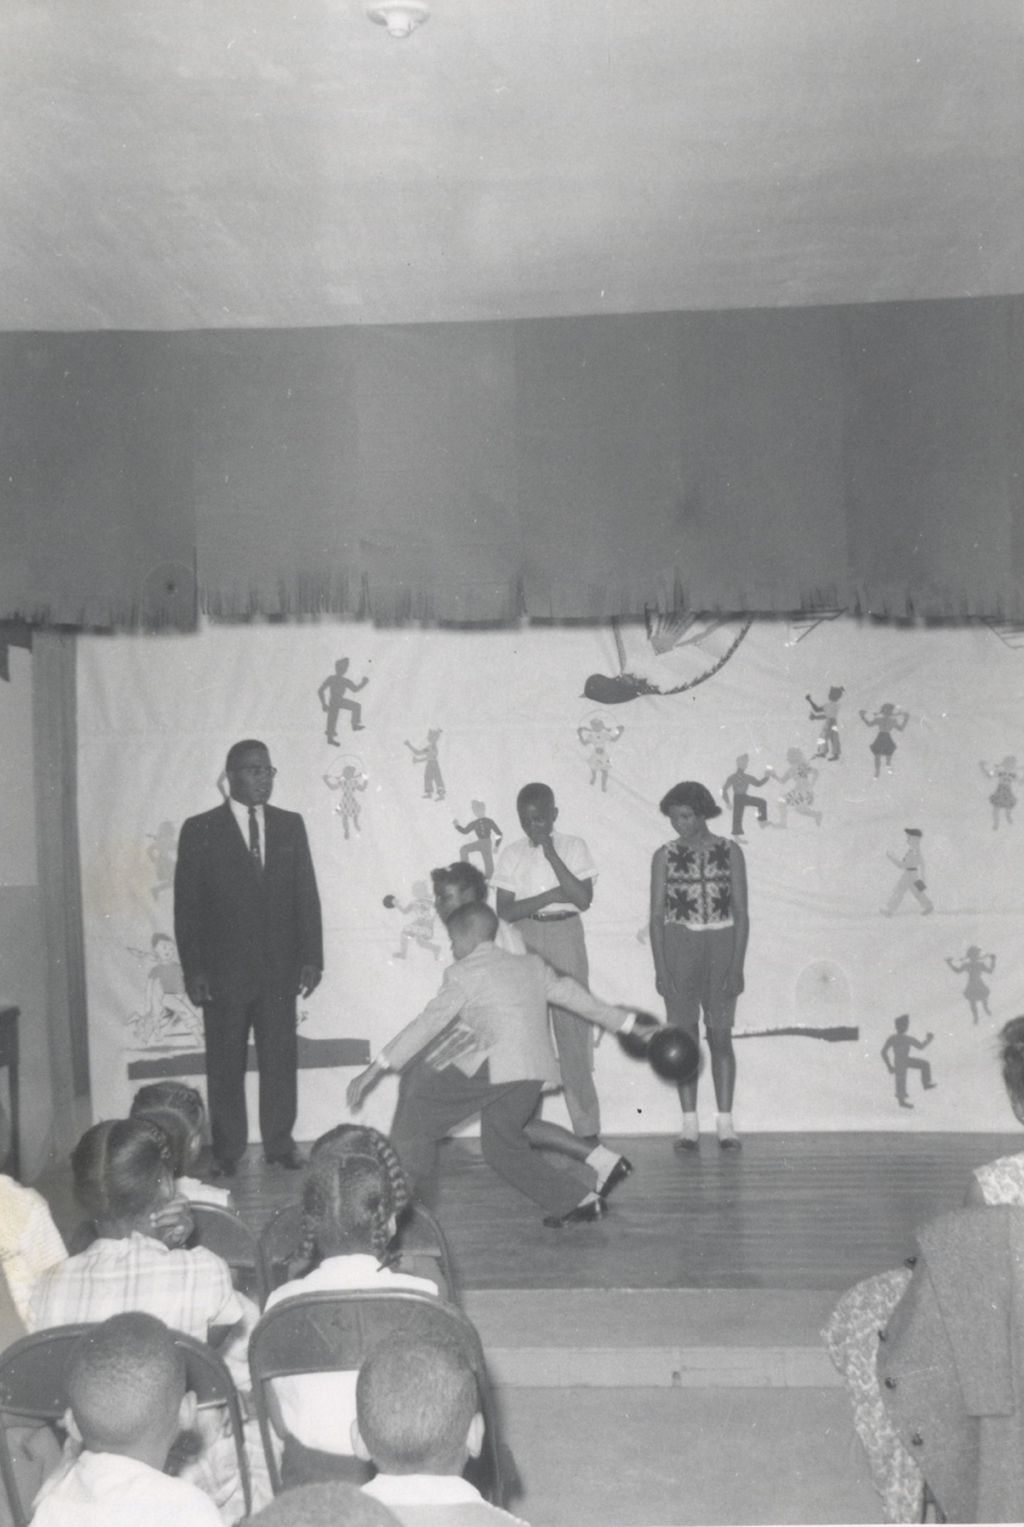 Two young people demonstrate bowling technique on stage at an event at Parkway Community House